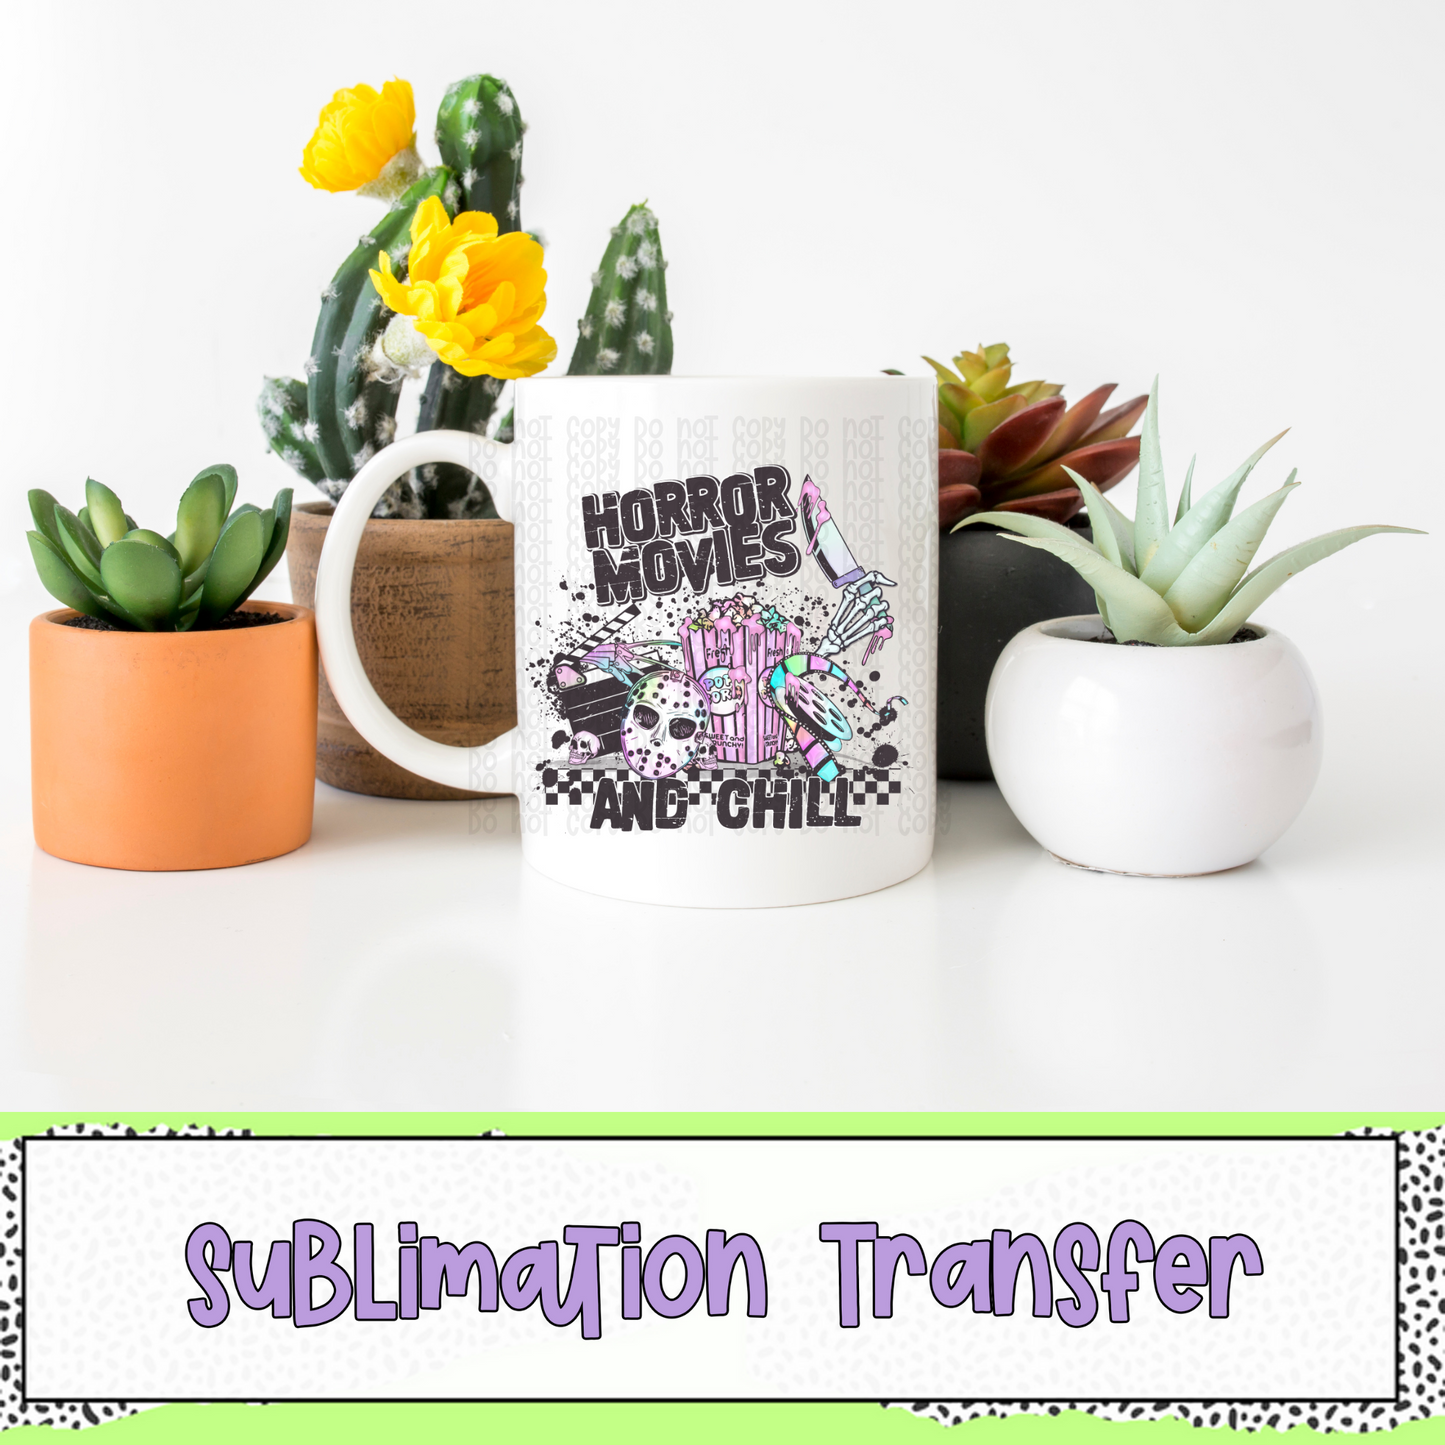 Horror Movies and Chill - SUBLIMATION TRANSFER